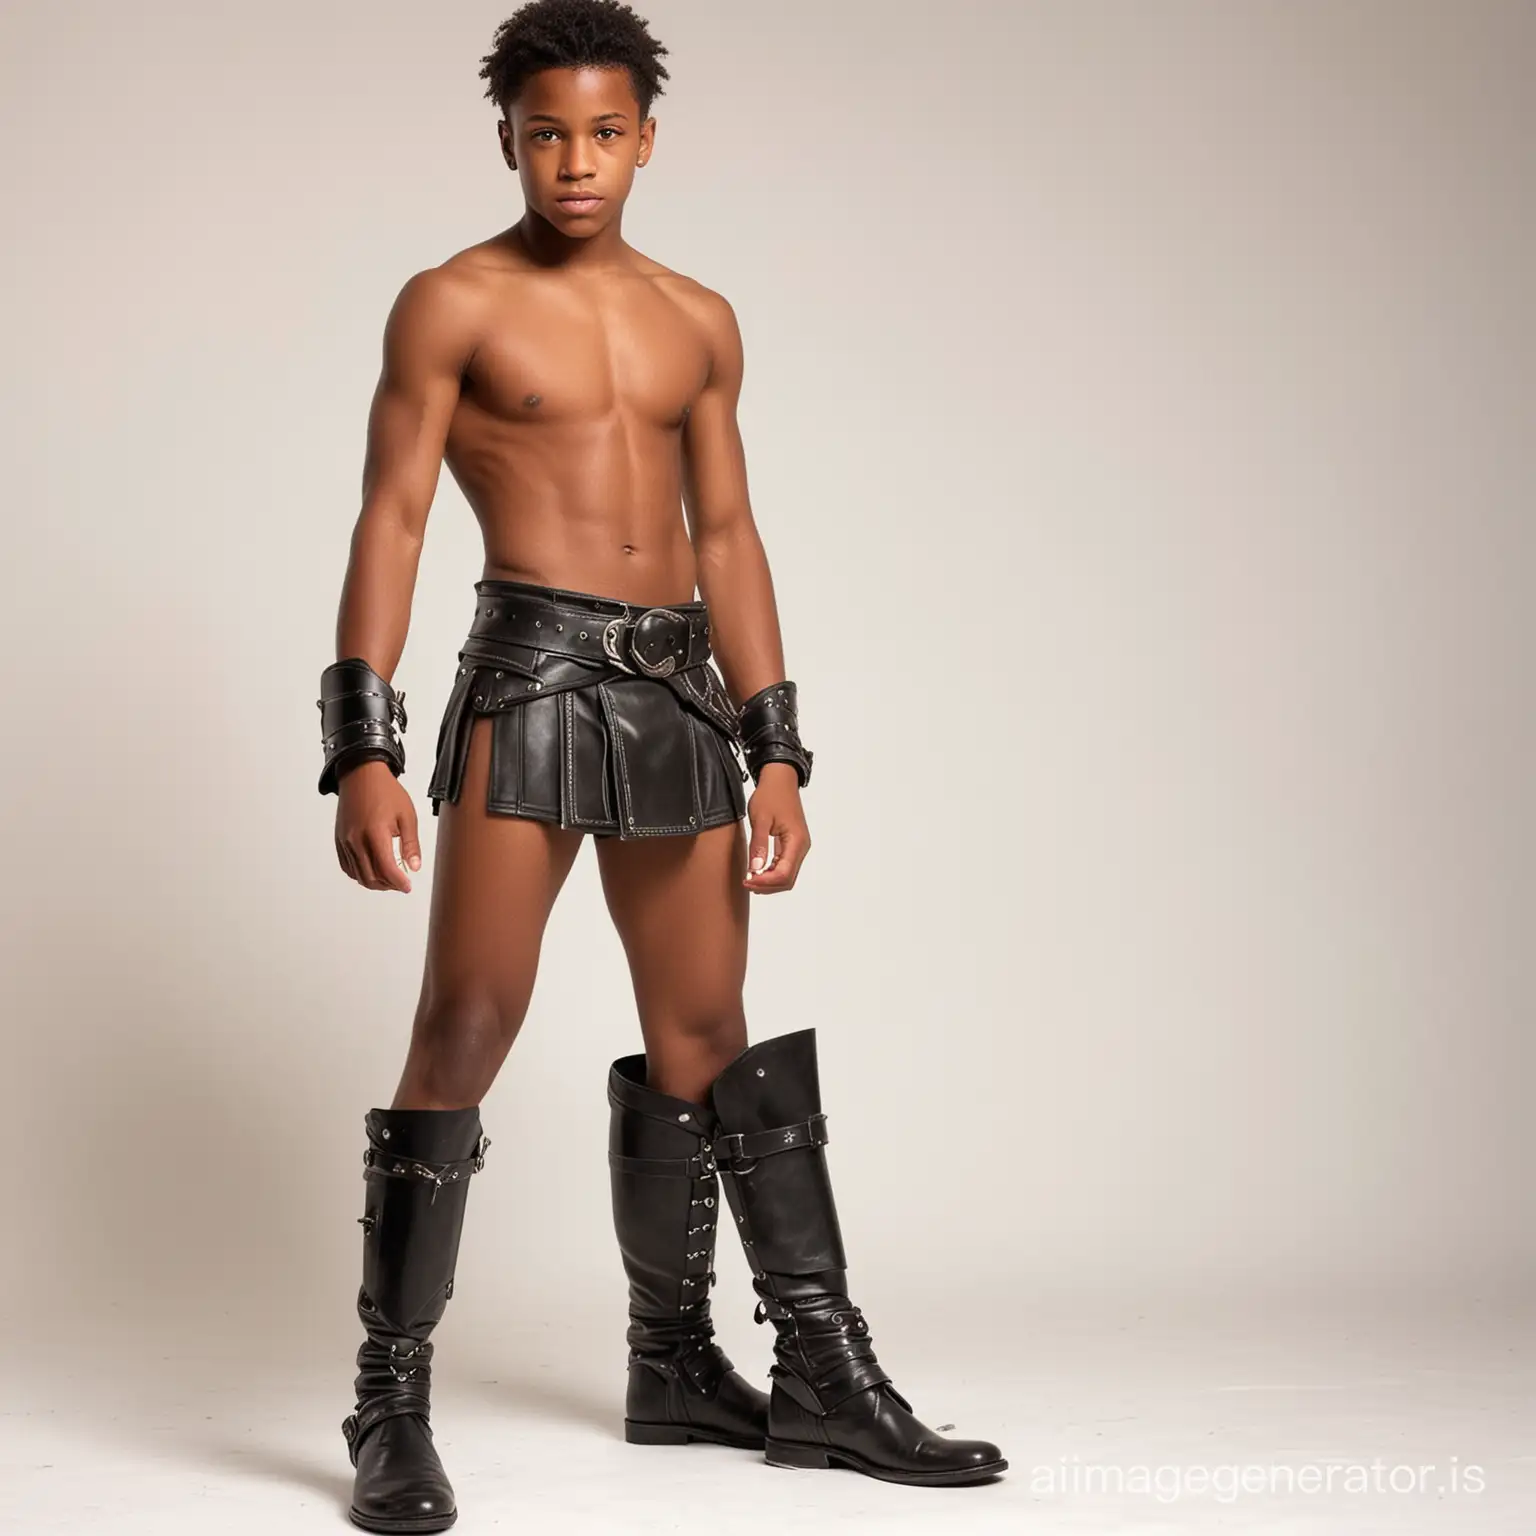 A very young black shirtless muscular teenage boy warrior wearing a very short loincloth, a big leather belt and boots, white background.